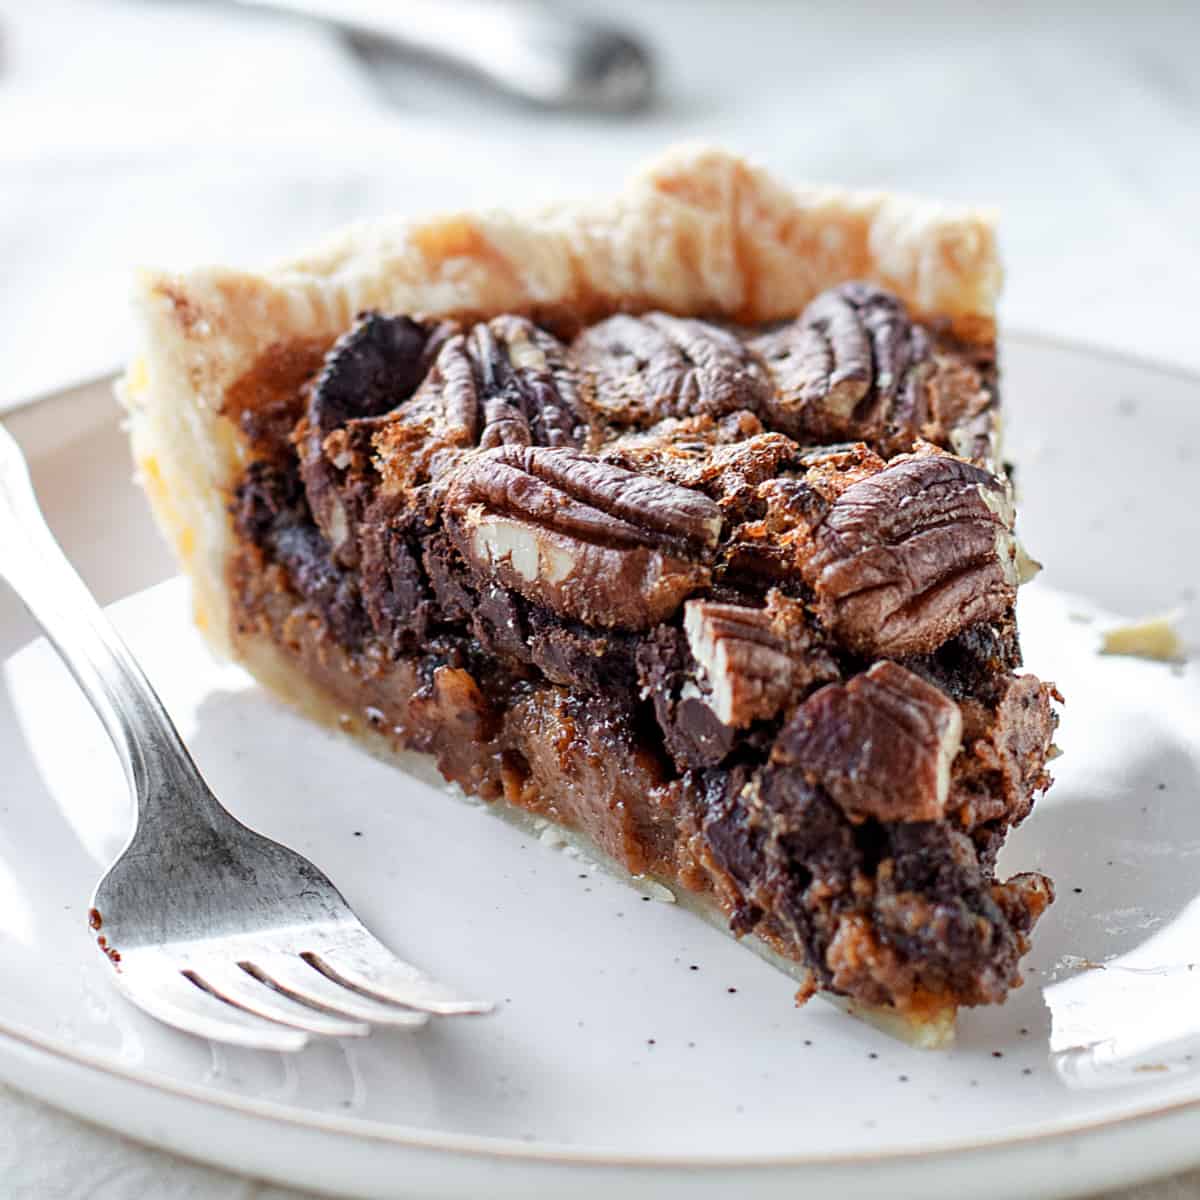 Close-up of slice of chocolate pecan pie on white plate, a silver fork